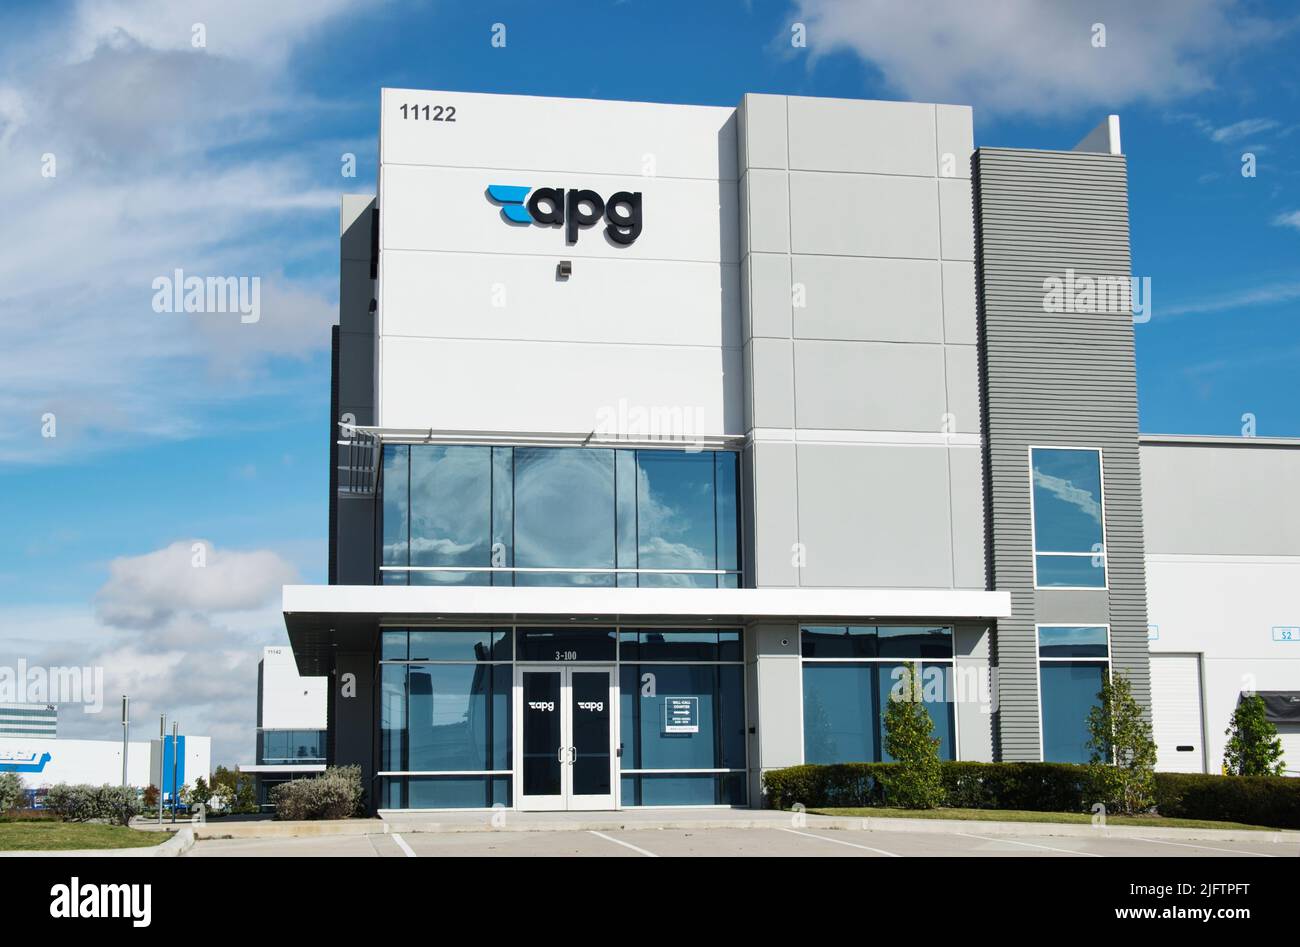 Houston, Texas USA 12-05-2021: APG office building exterior in Houston, TX. Manufacturer and distributor of fluid sealing and conveyance products. Stock Photo